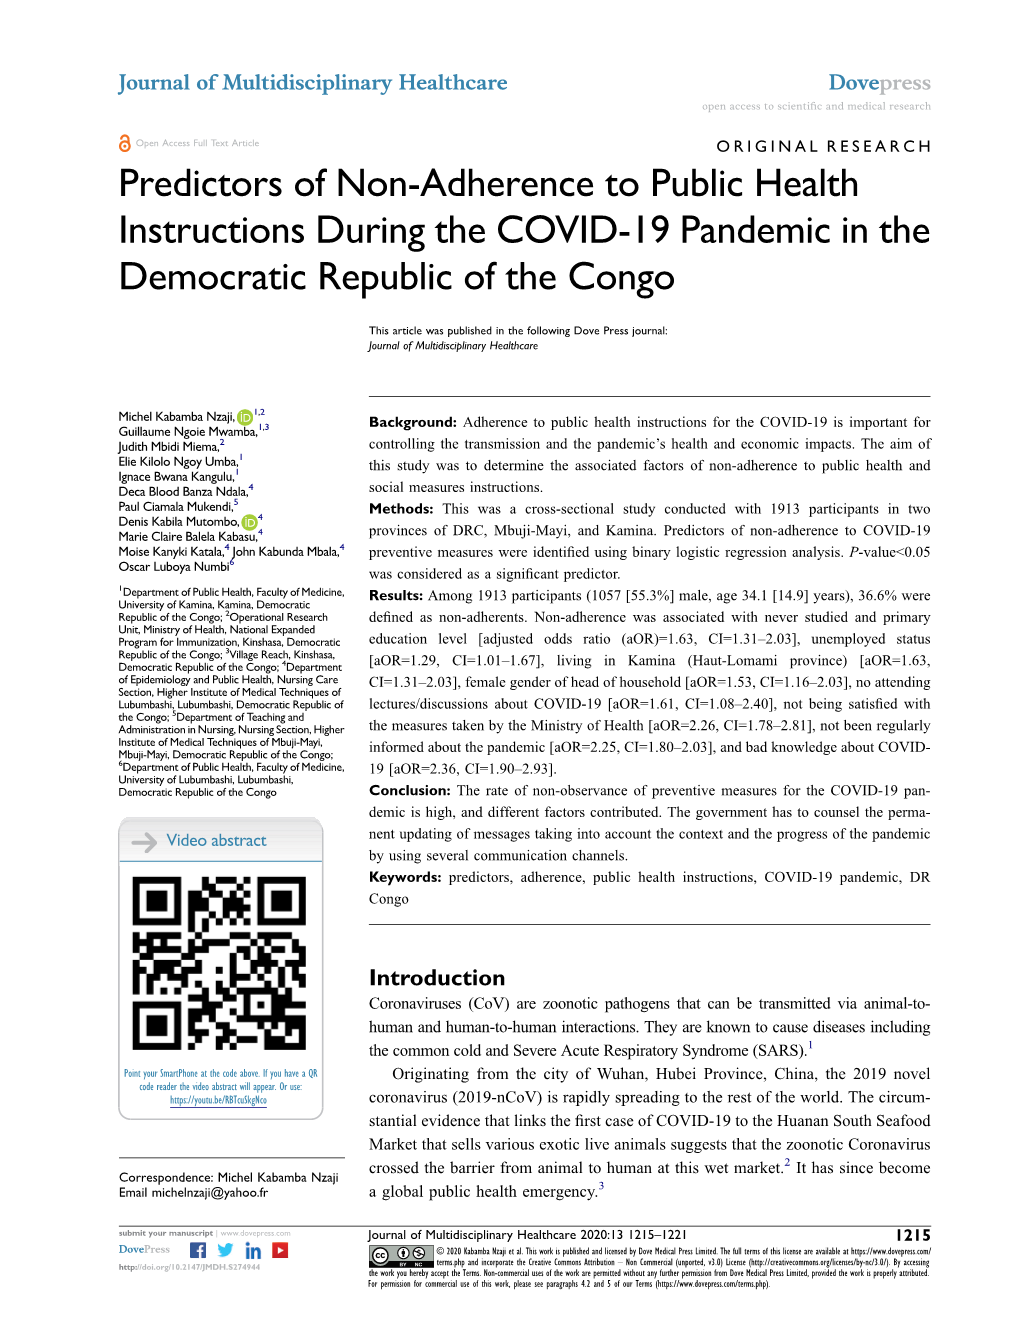 Predictors of Non-Adherence to Public Health Instructions During the COVID-19 Pandemic in the Democratic Republic of the Congo